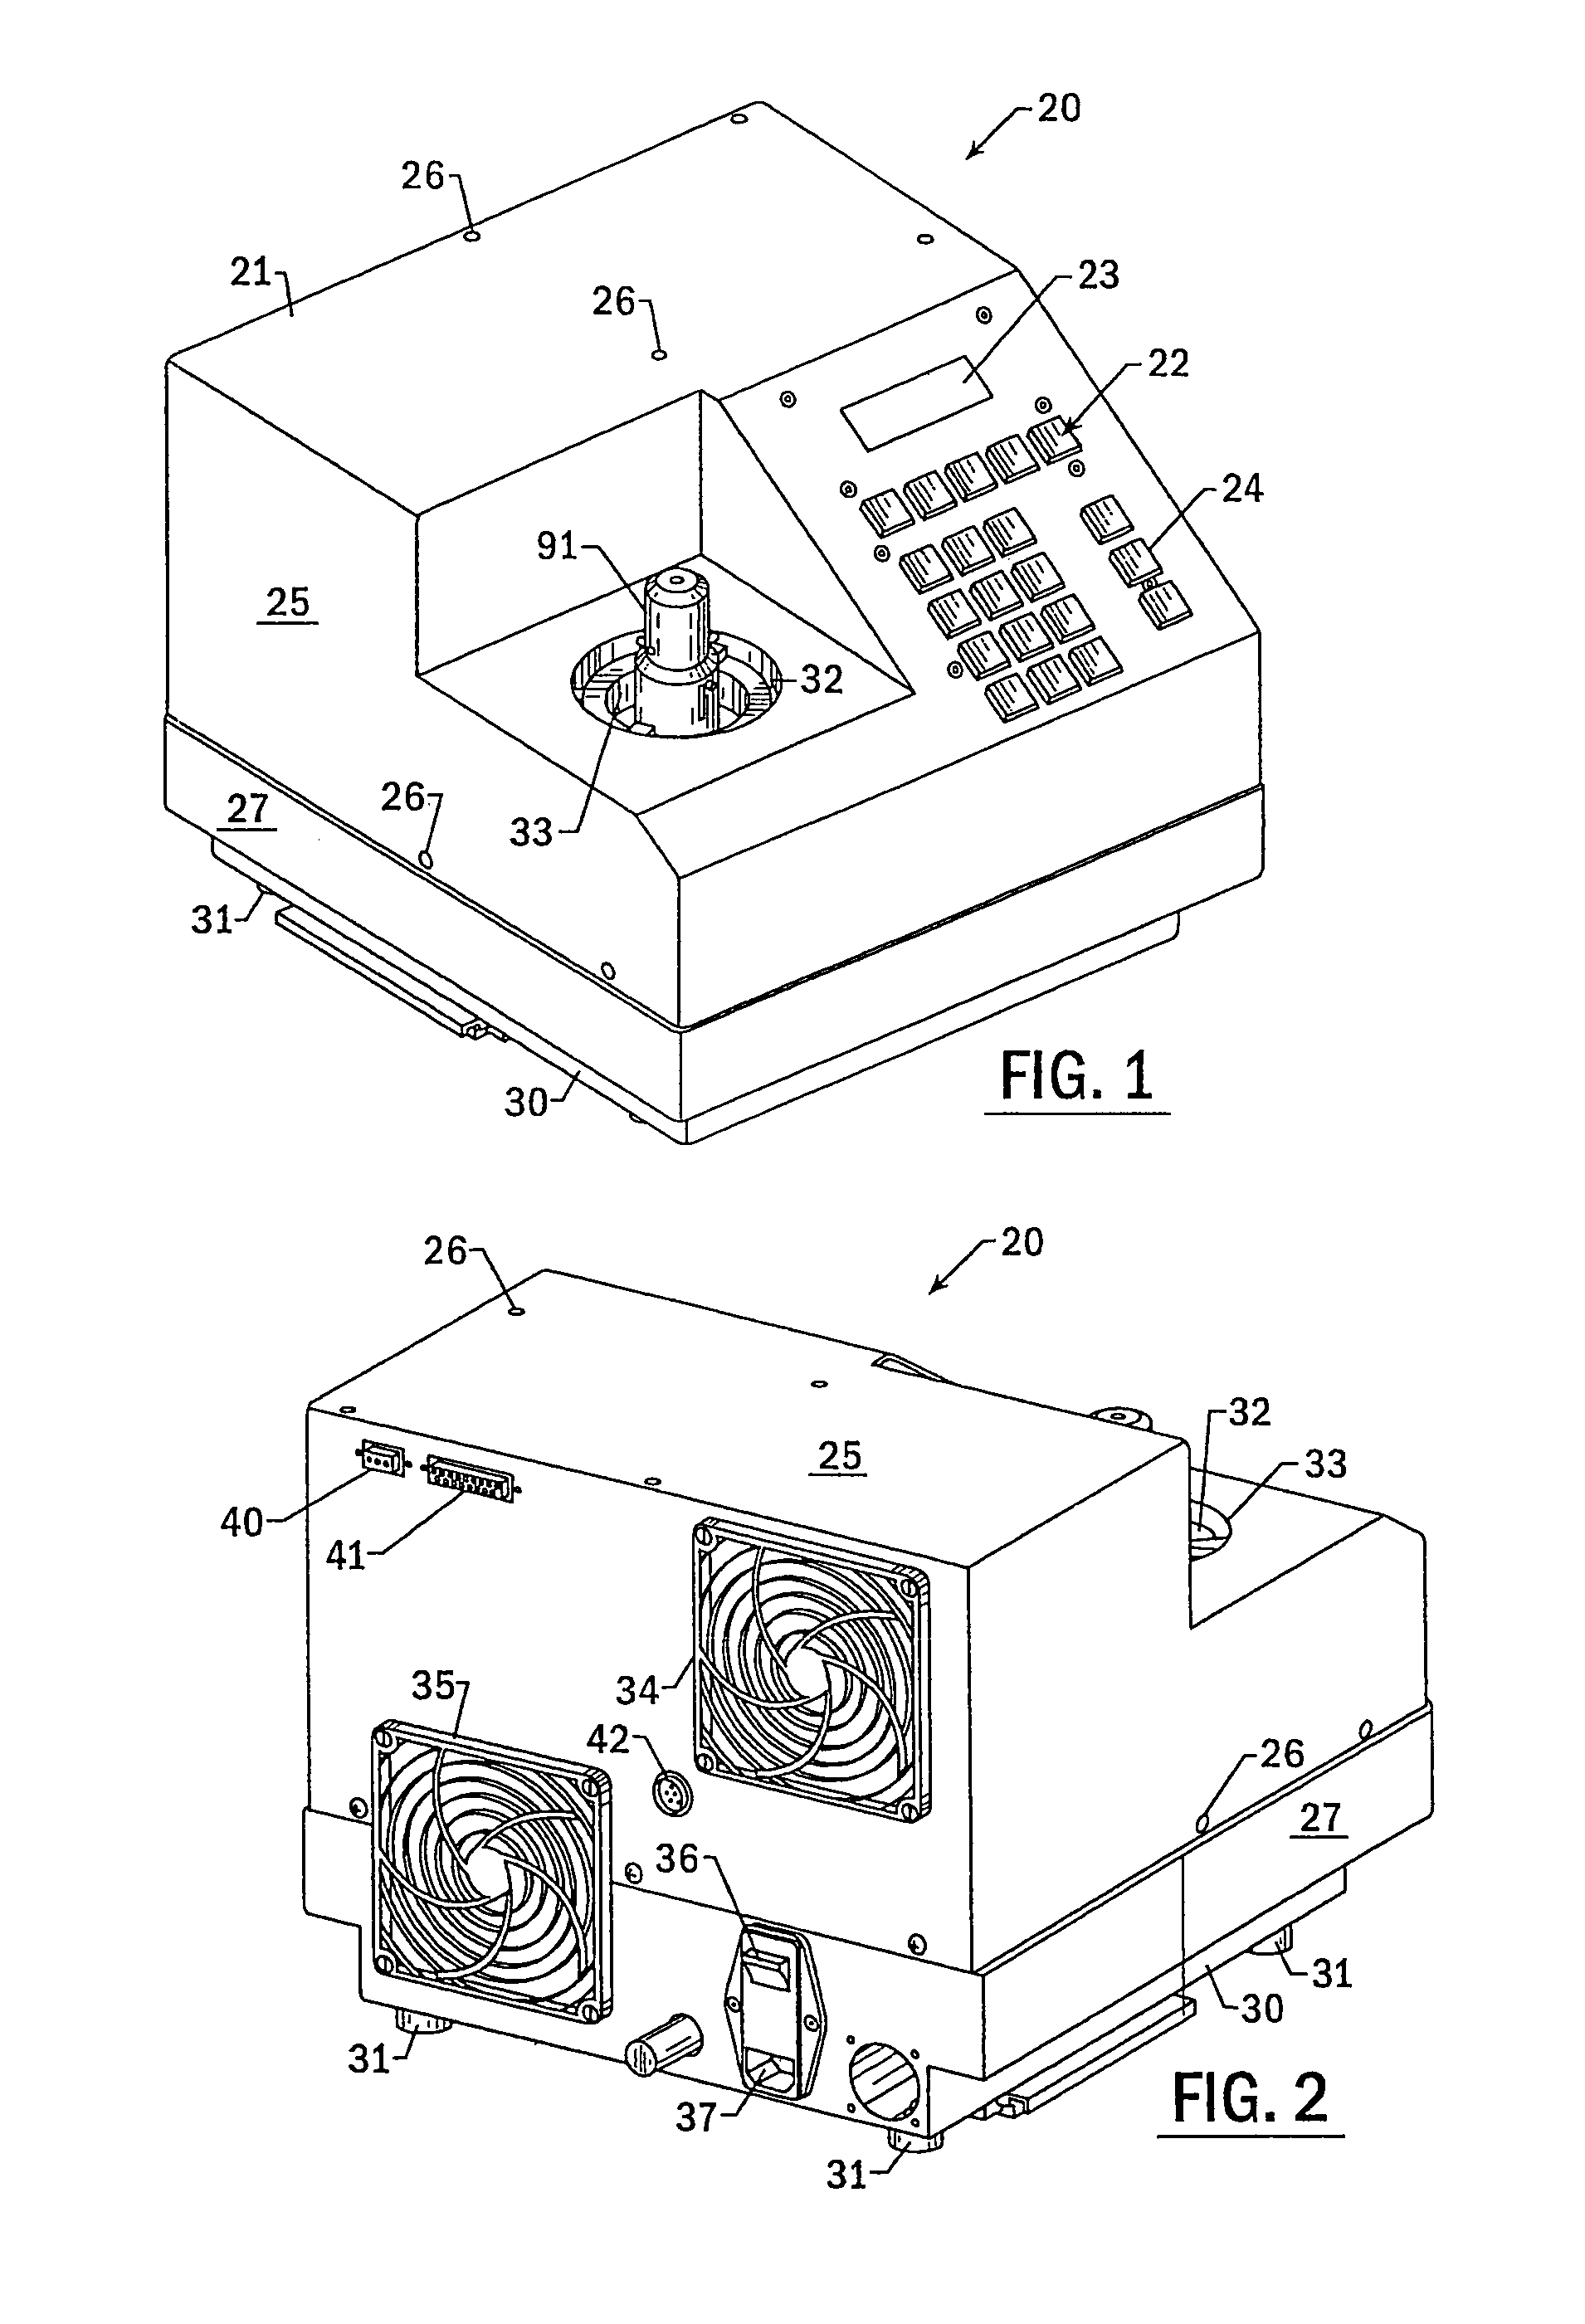 Pressure measurement in microwave-assisted chemical synthesis